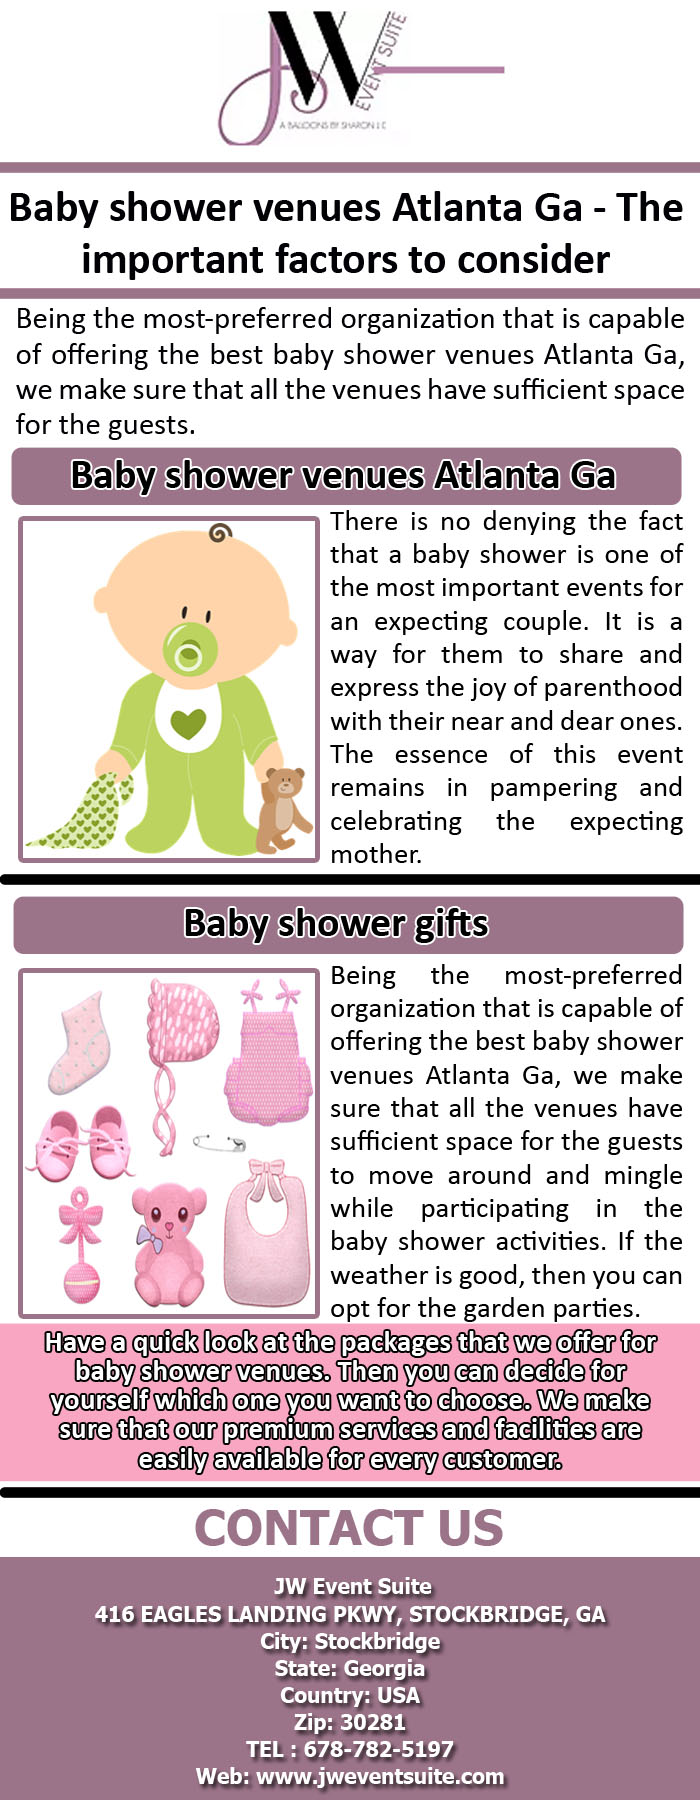 Baby shower venues Atlanta Ga - The important factors to consider.jpg  by Jweventsuite